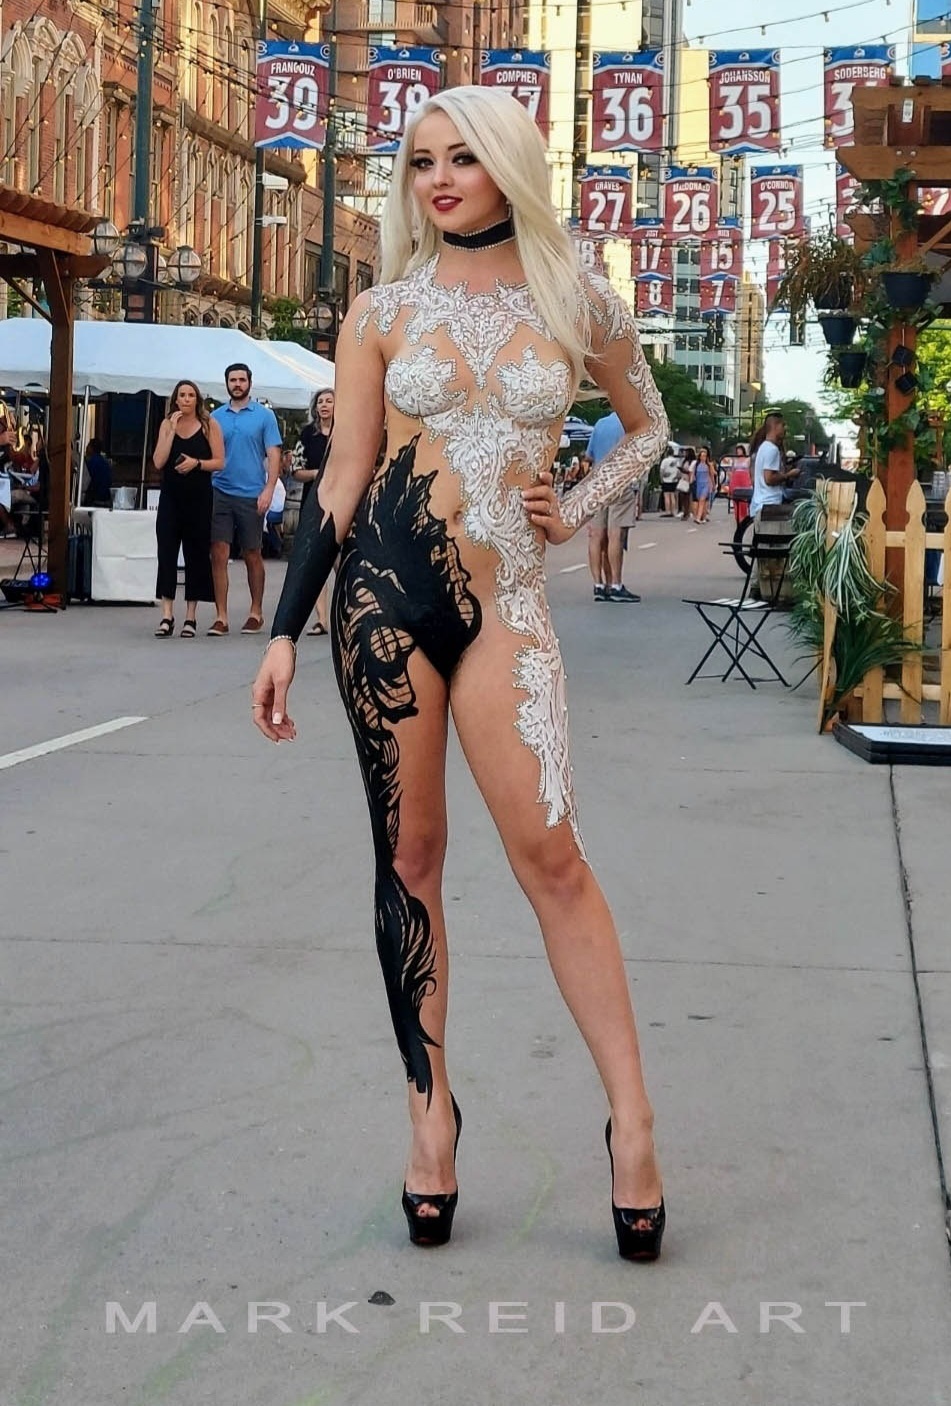 Full body painting on a thin, blonde, long haired woman. She has lace that is white on the her top and trailing down her left leg.  Black lace starting on her right torso under her arm that trails down her right leg.